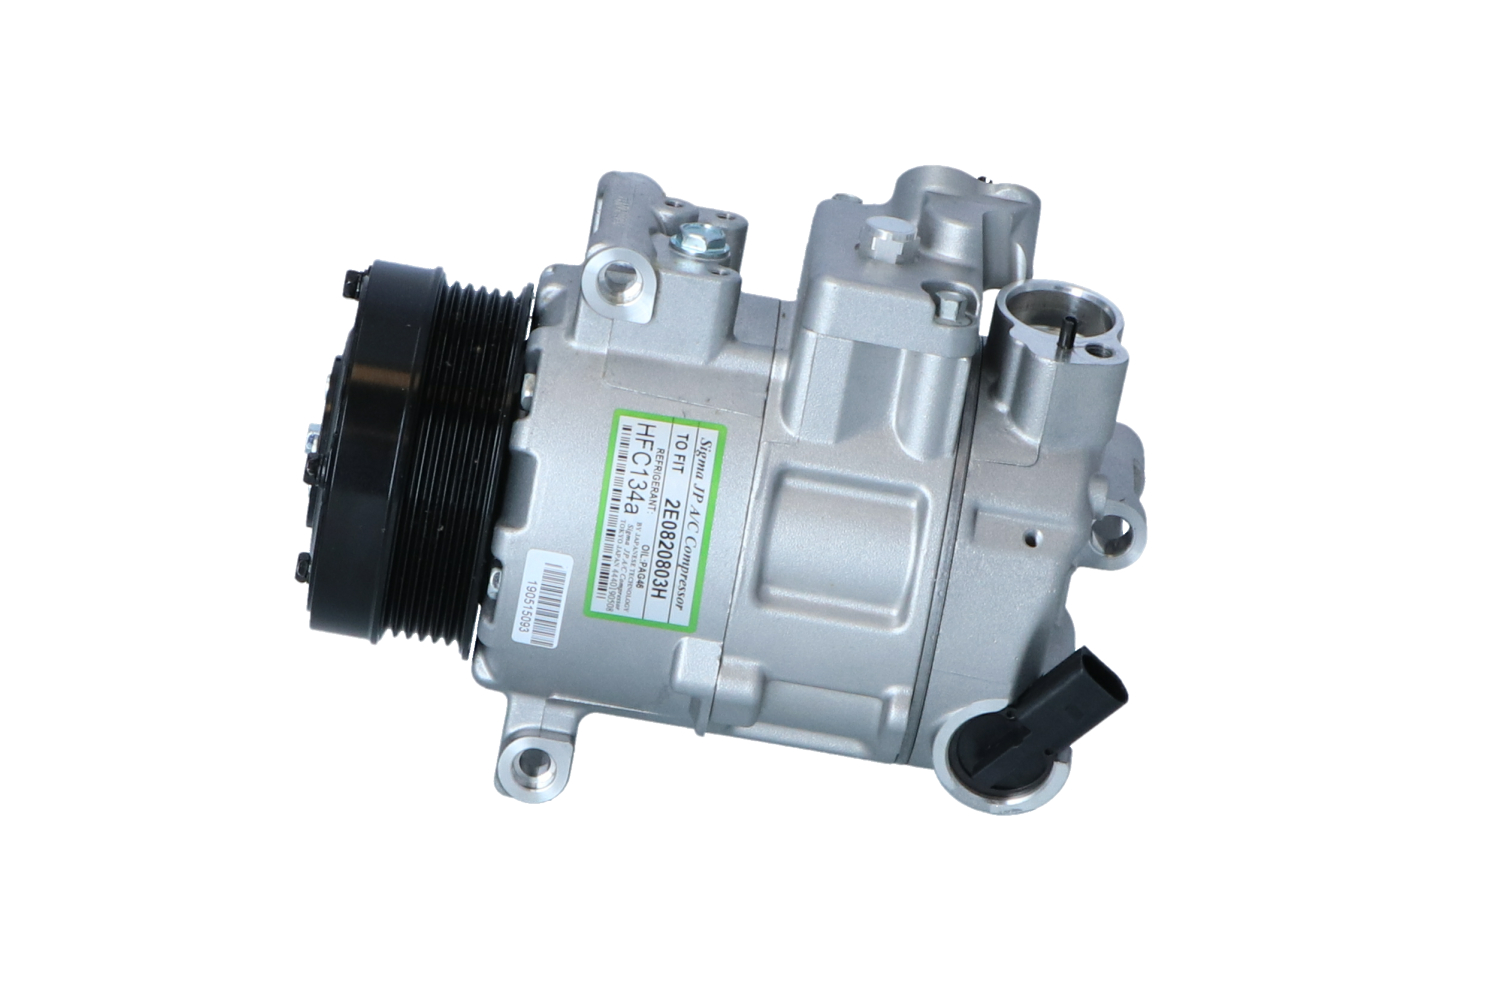 NRF 32817 Air conditioning compressor 7SEU17, 12V, PAG 46, with PAG compressor oil, with seal ring